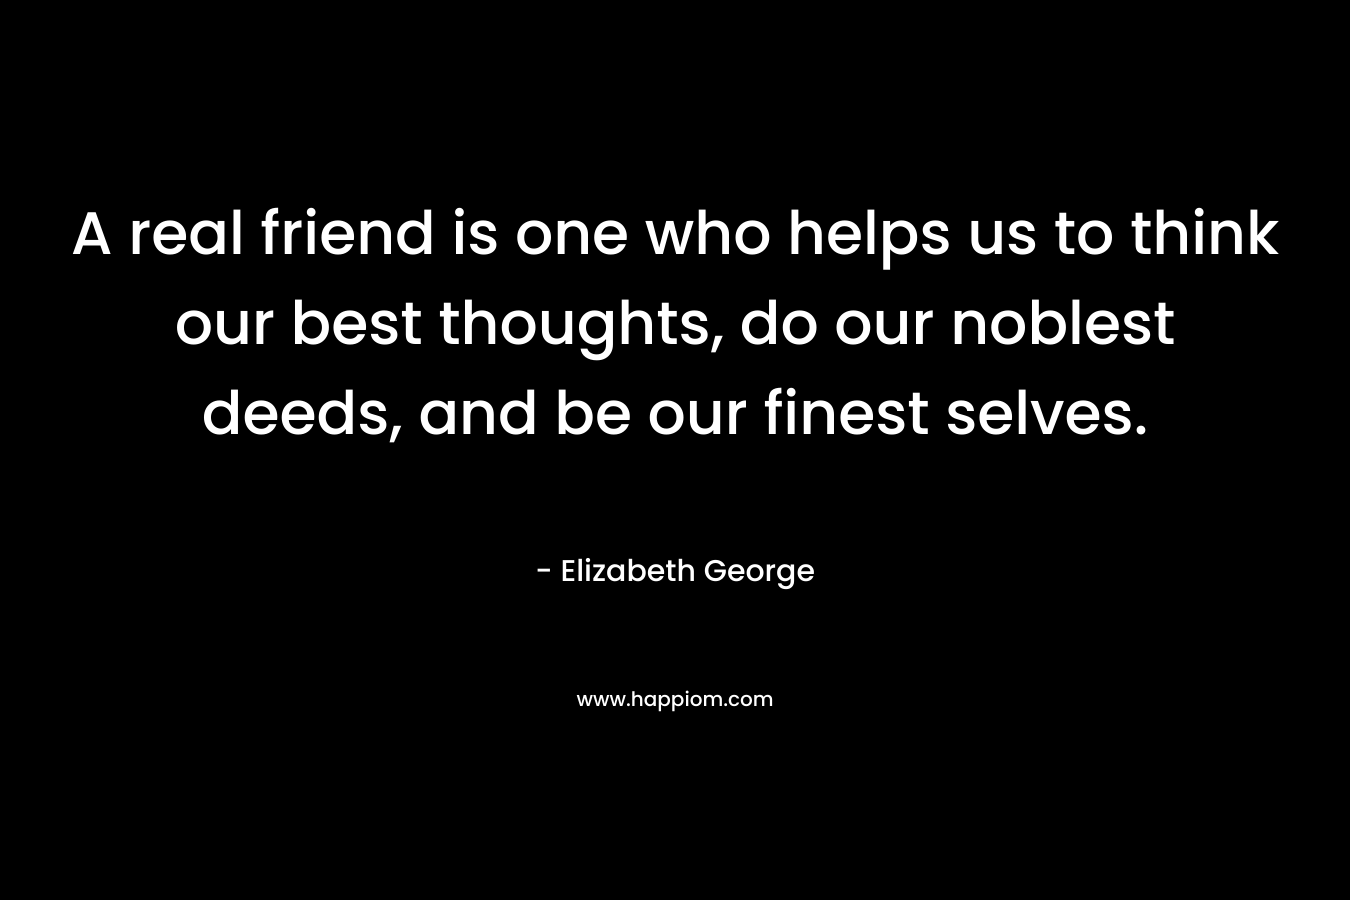 A real friend is one who helps us to think our best thoughts, do our noblest deeds, and be our finest selves. – Elizabeth George